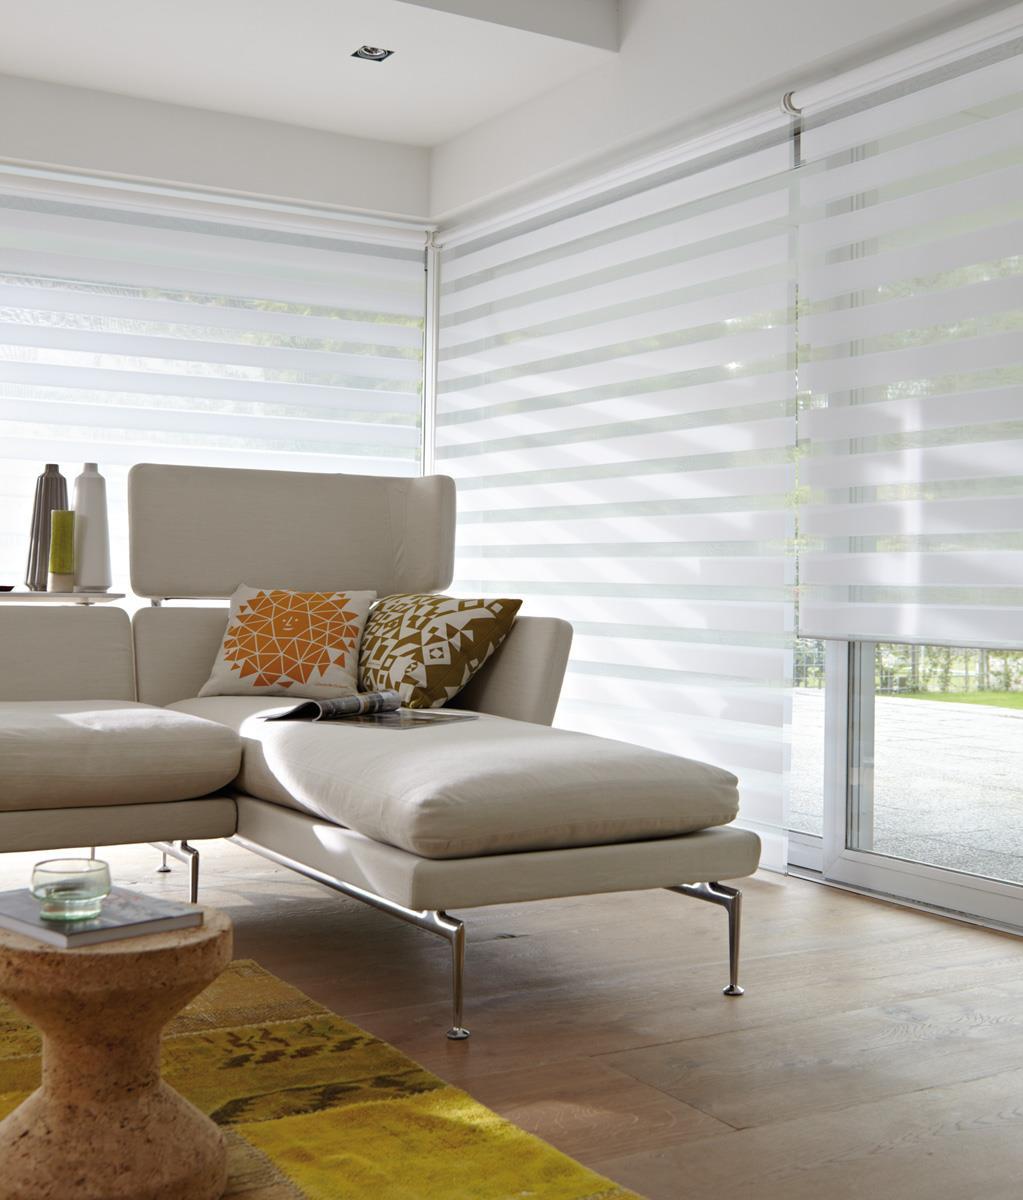 Luxaflex Twist Blinds Luxaflex Twist Blinds are an innovative new window blind that features two layers of translucent and opaque horizontal striped fabric.